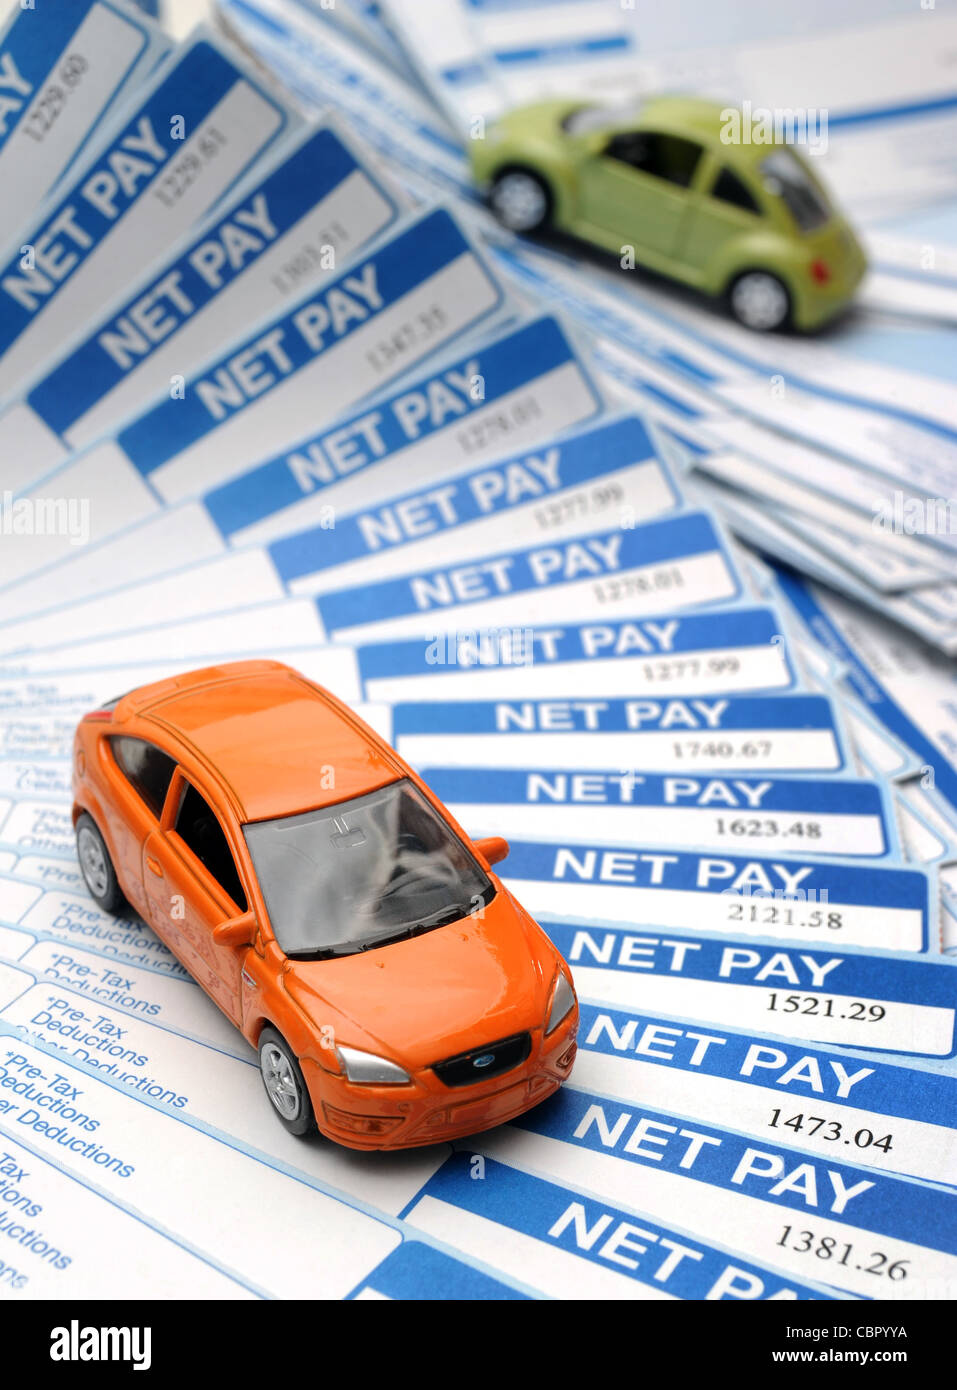 BRITISH PAYSLIPS WITH MODEL CARS RE INCOMES WAGES JOBS RISING INFLATION BILLS HOUSEHOLD BUDGETS SALARIES NET PAY MONEY ETC UK Stock Photo